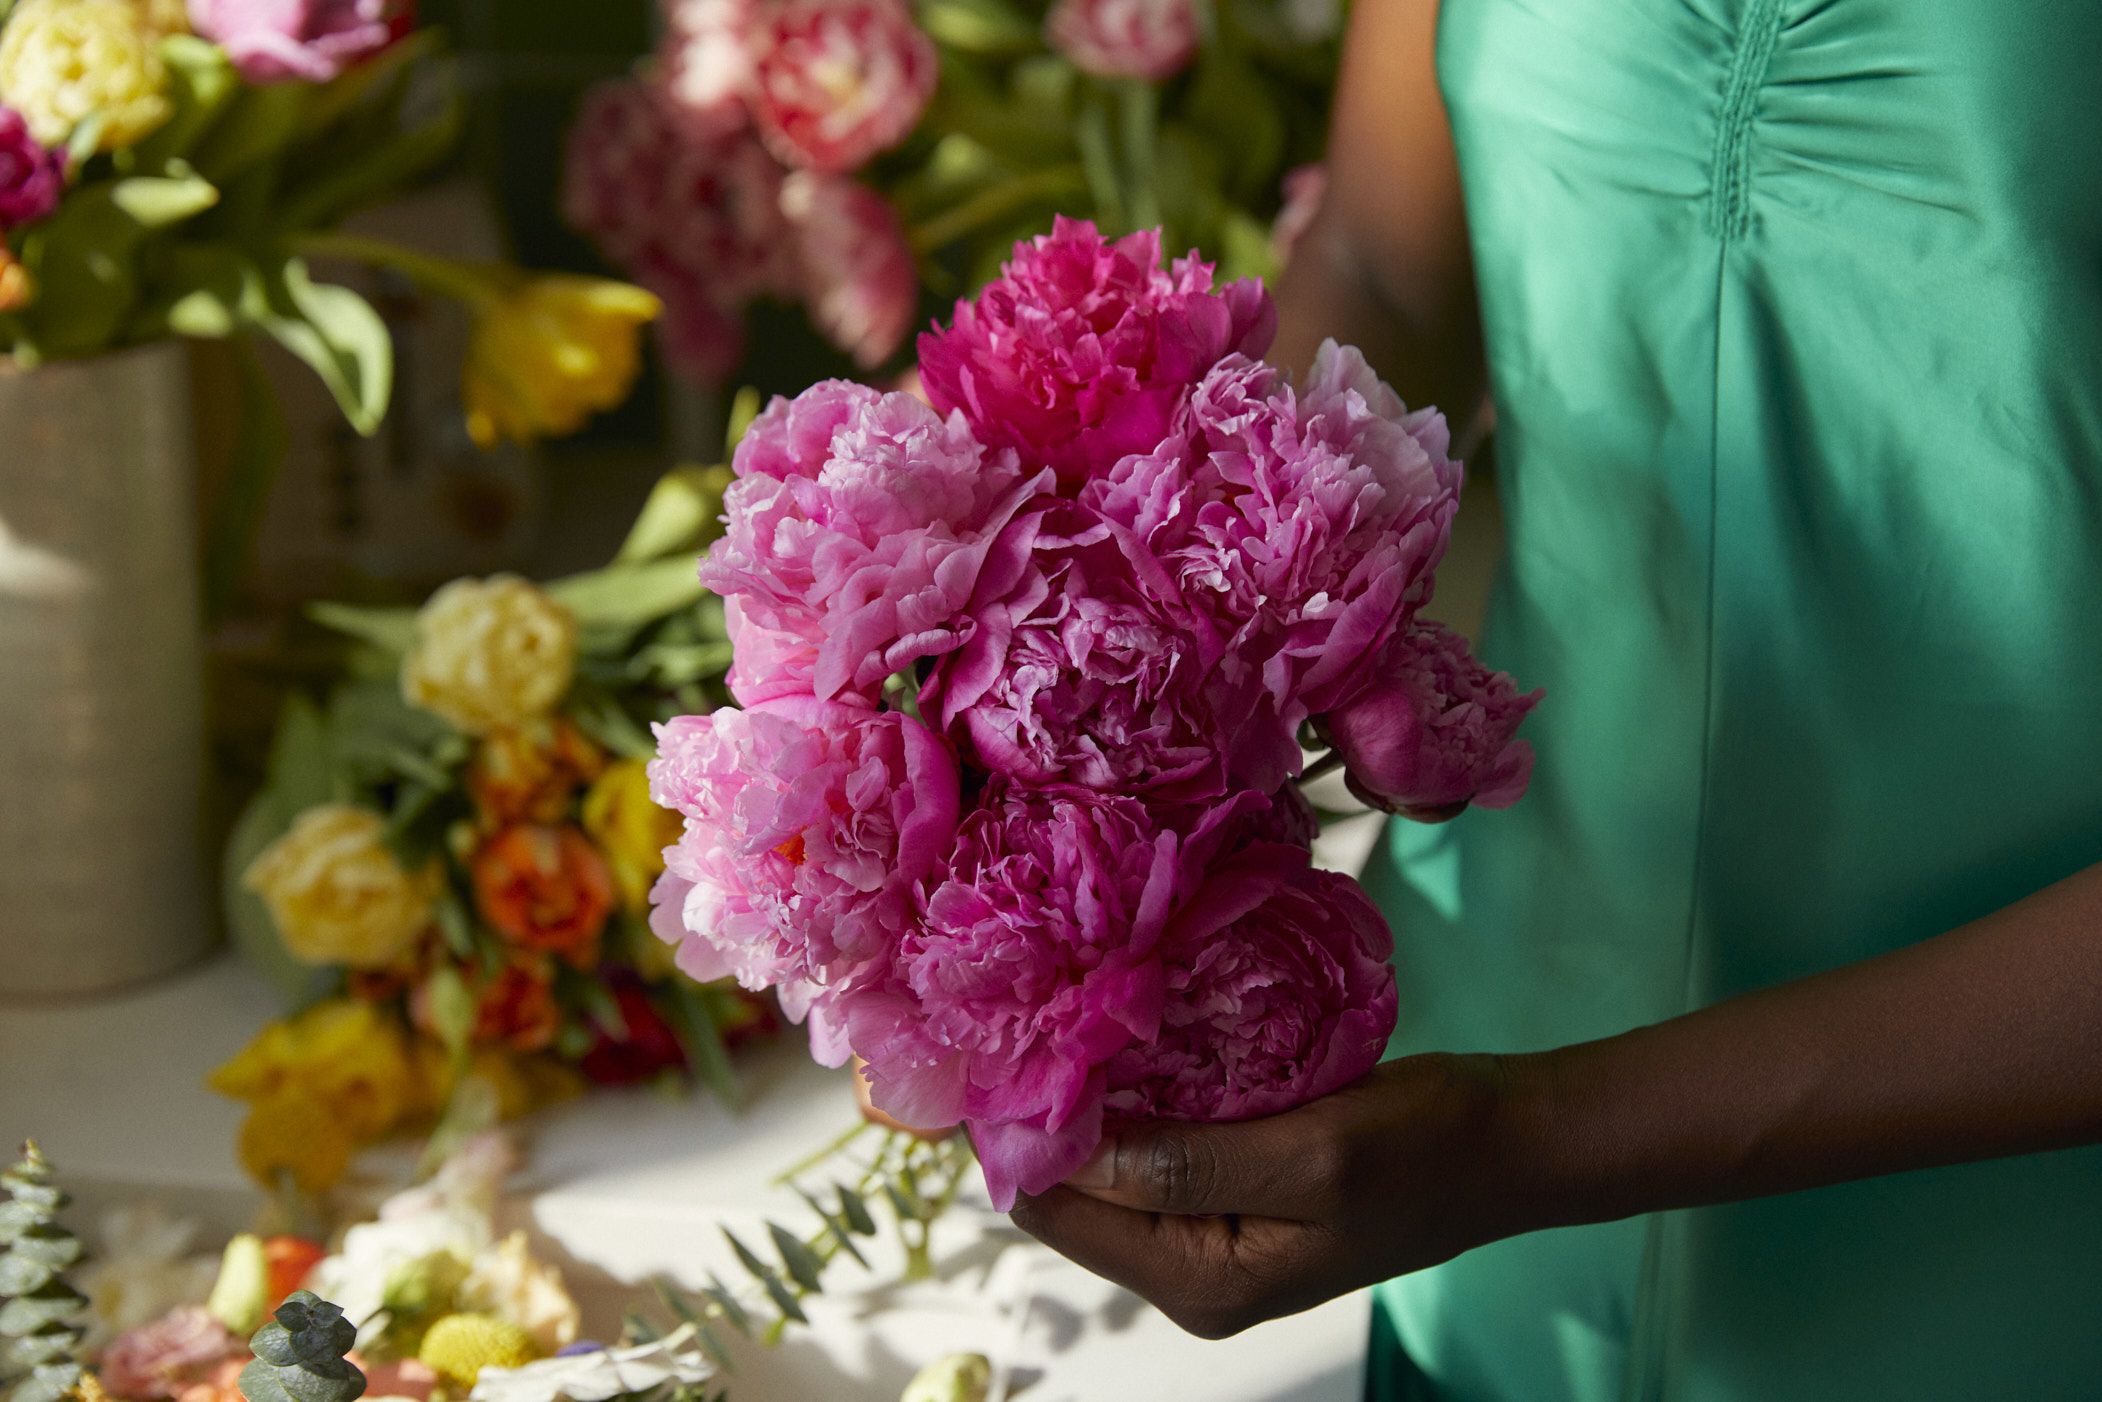 Up close image of pink peonies held by a woman in a green dress.